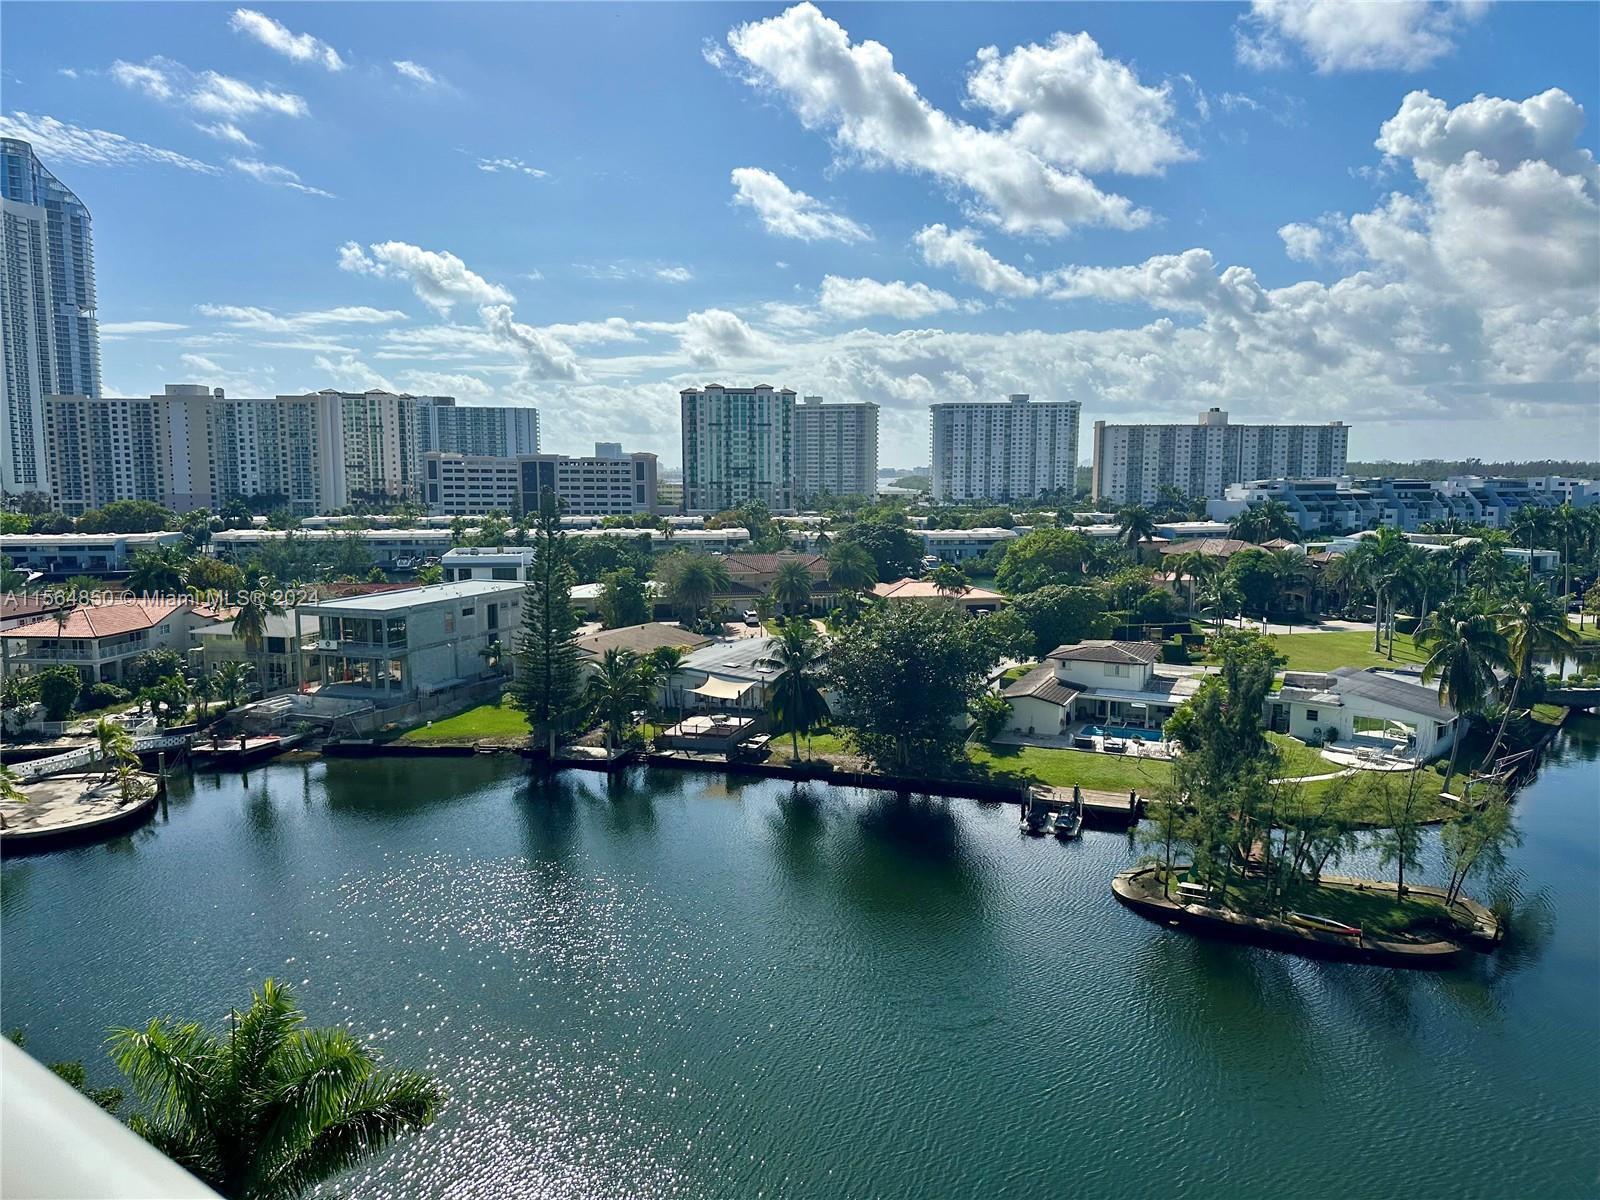 Fully furnished spacious 2 Bedrooms, 2 Bathrooms + DEN with stunning view of the Intracoastal and just across the street from the beach awaits you. Master suite has large bathroom with jacuzzi, walk-in shower, bidet and large closets. Spacious balcony with access from every room. Residents of Oceania V enjoy BEACH CLUB w beach services, restaurants, exercise classes, spas, hair salon, 2 gyms, squash court, racquetball, basketball, tennis courts, dog-walk area, valet parking, 24-hour security and more. Oceania V is in the heart of Sunny Isles Beach, step away from sand beaches, elegant restaurants, shopping, lively entertainment and A1 school district.